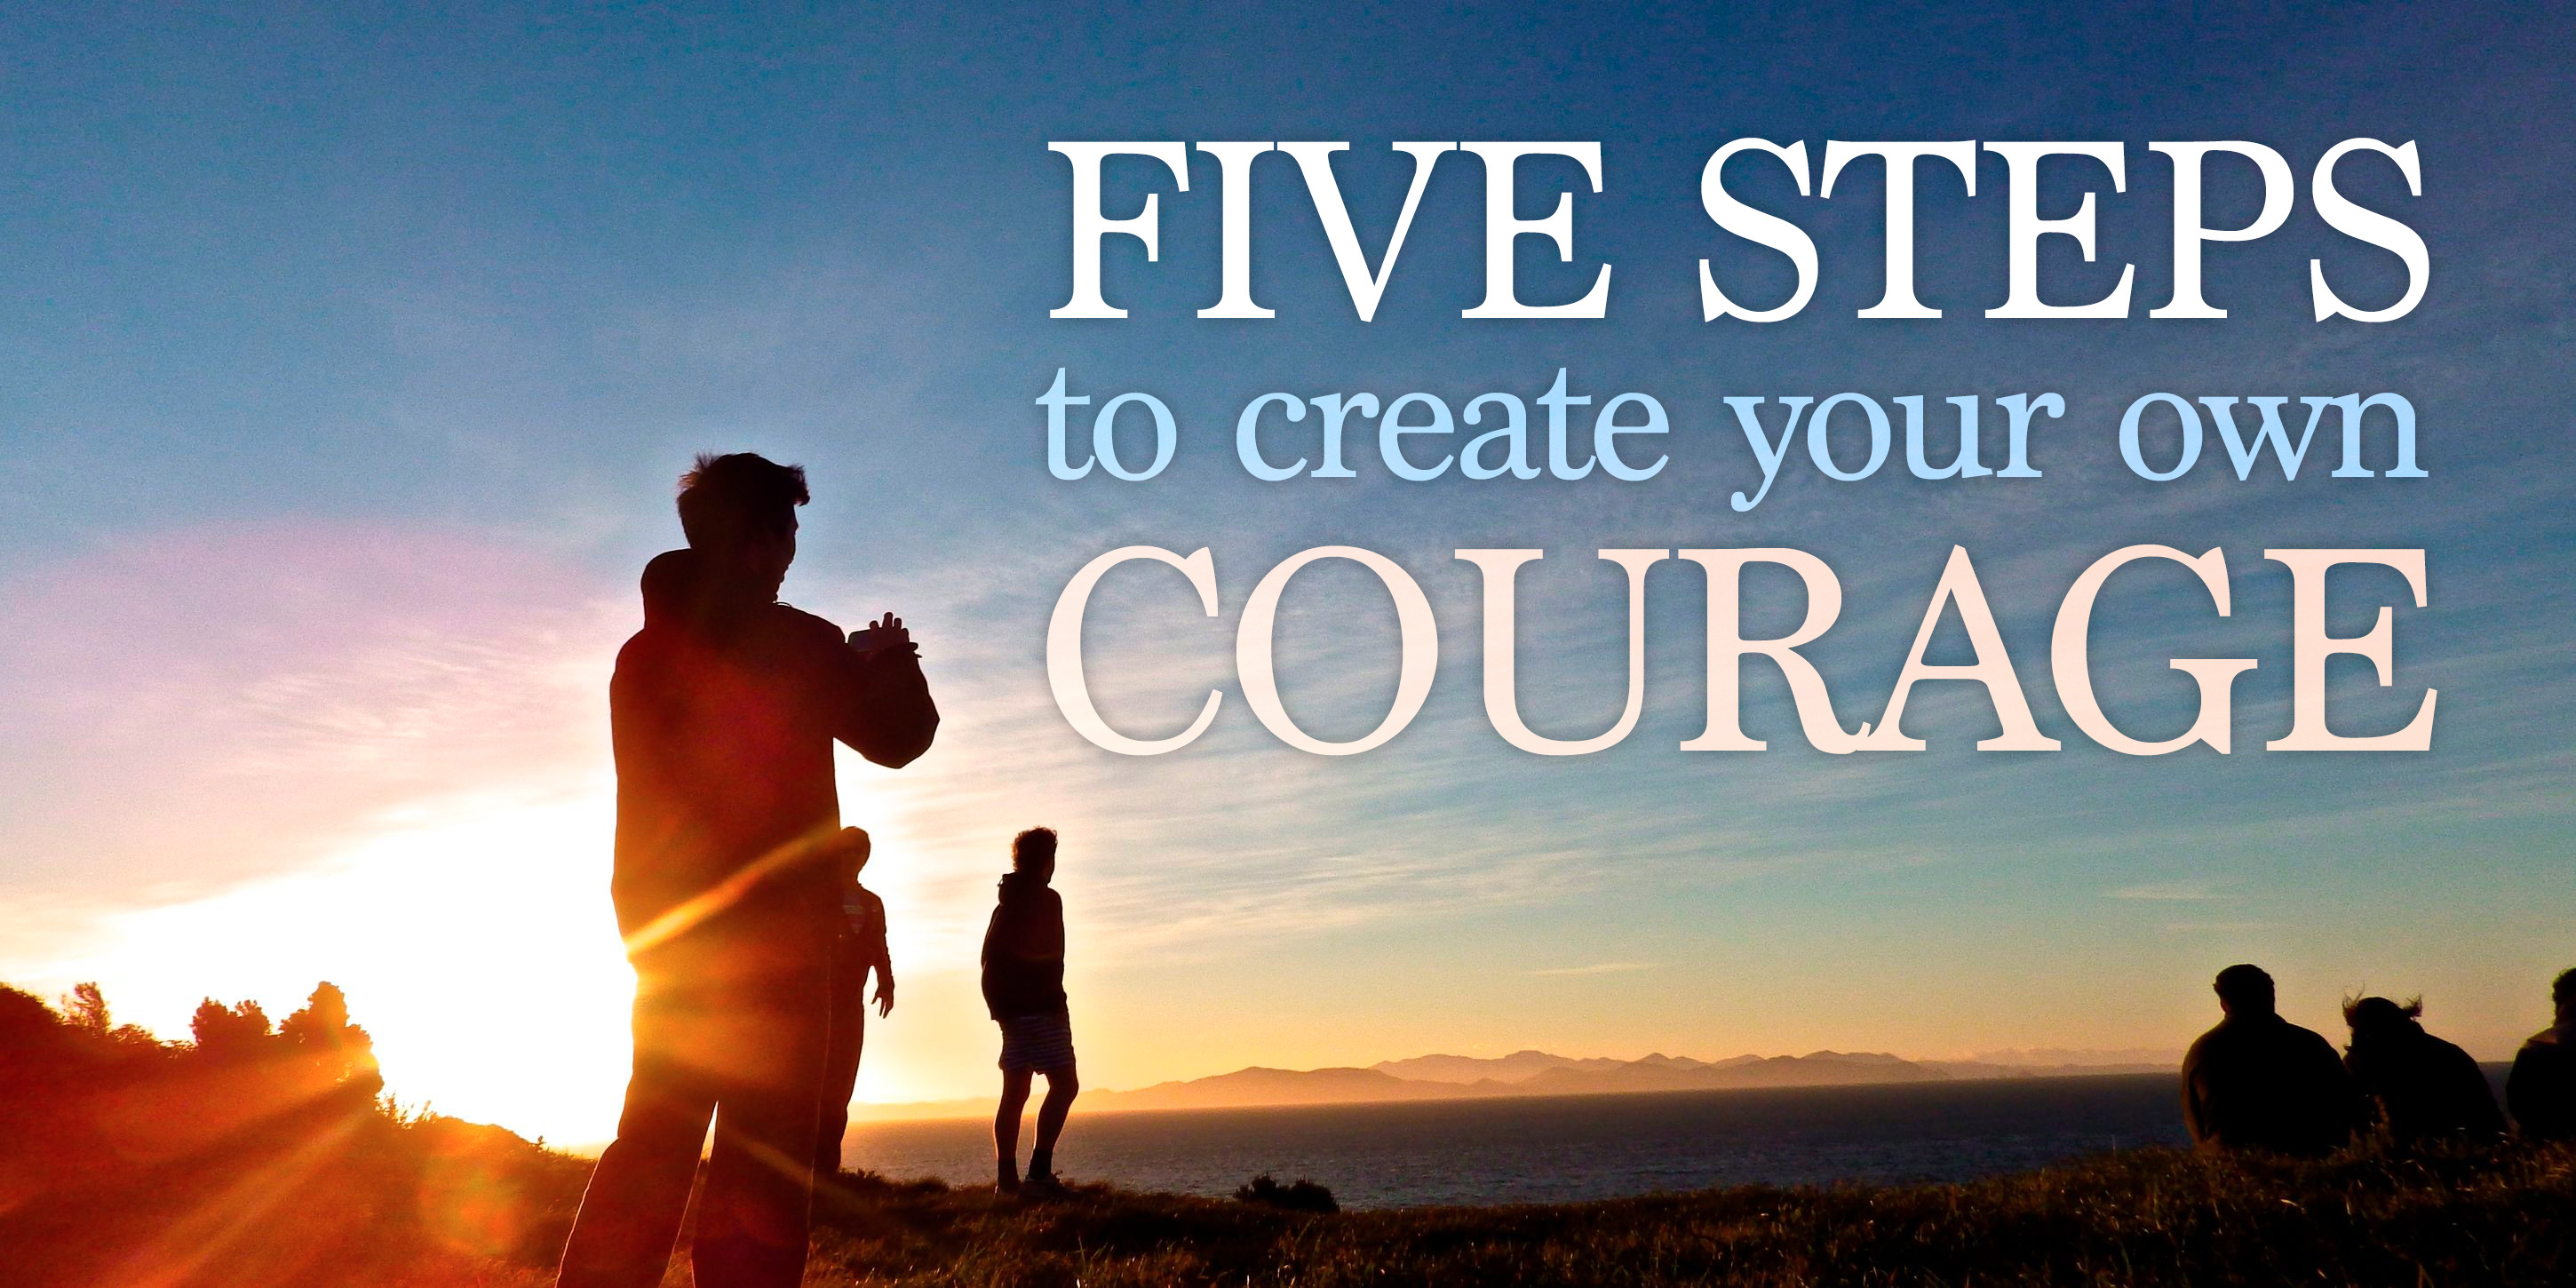 image from Five steps to create your own courage and willpower.